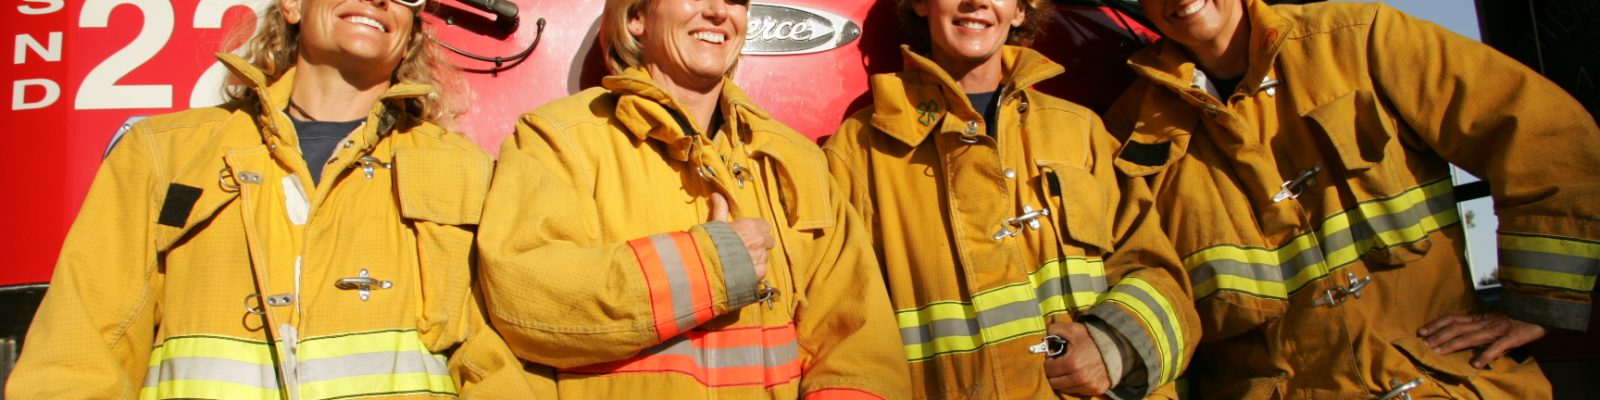 Firefighter Robyn with other firefighter teammates